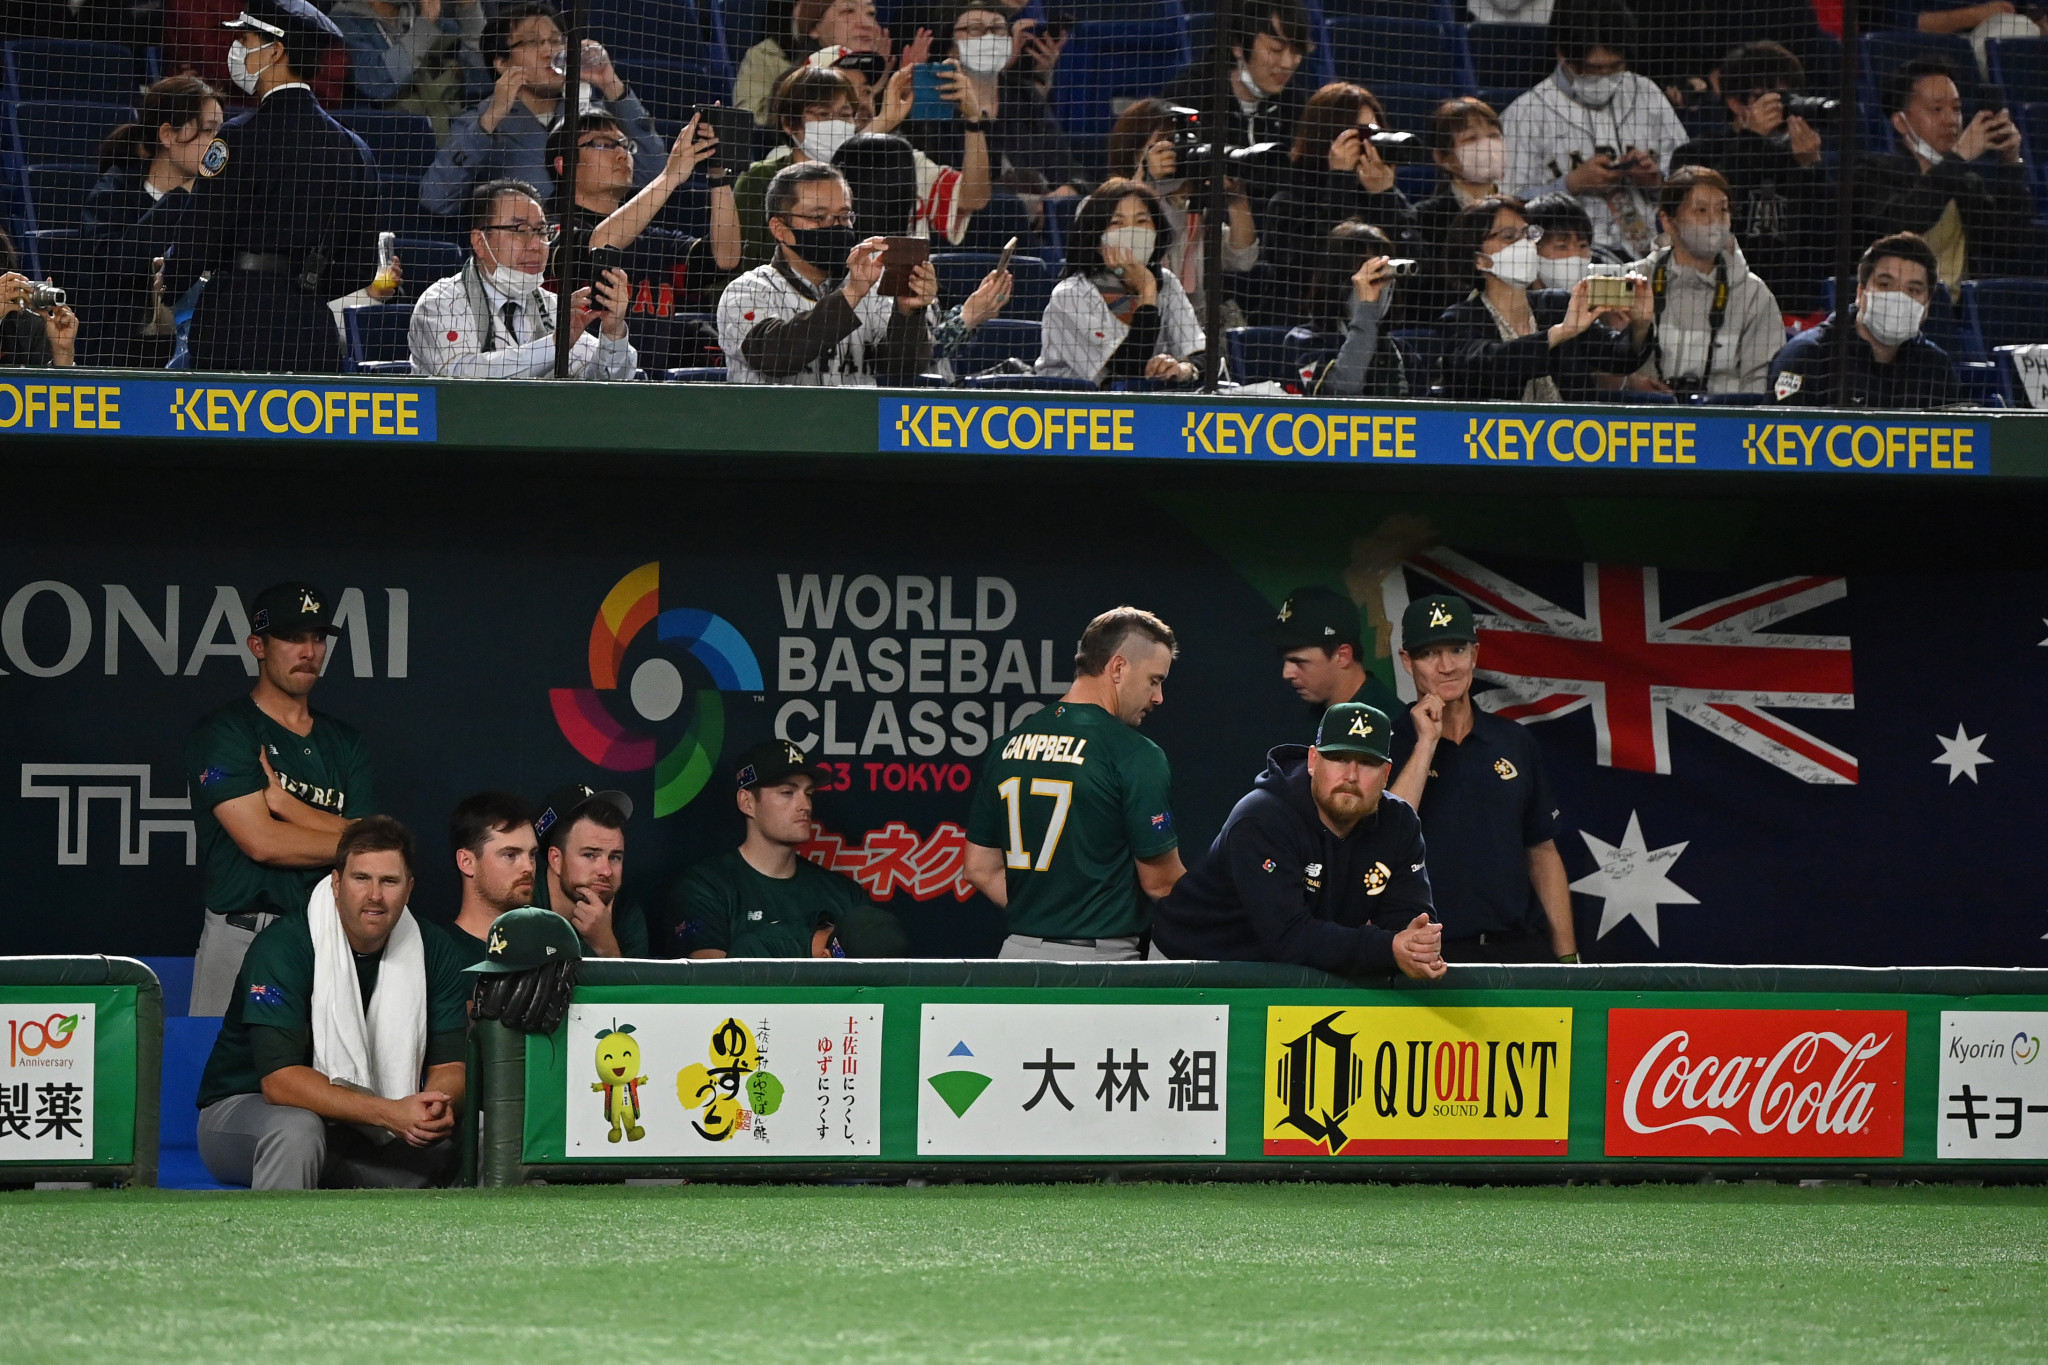 Australia reached the quarter-finals of the World Baseball Classic for the first time in the competition's history ©Getty Images